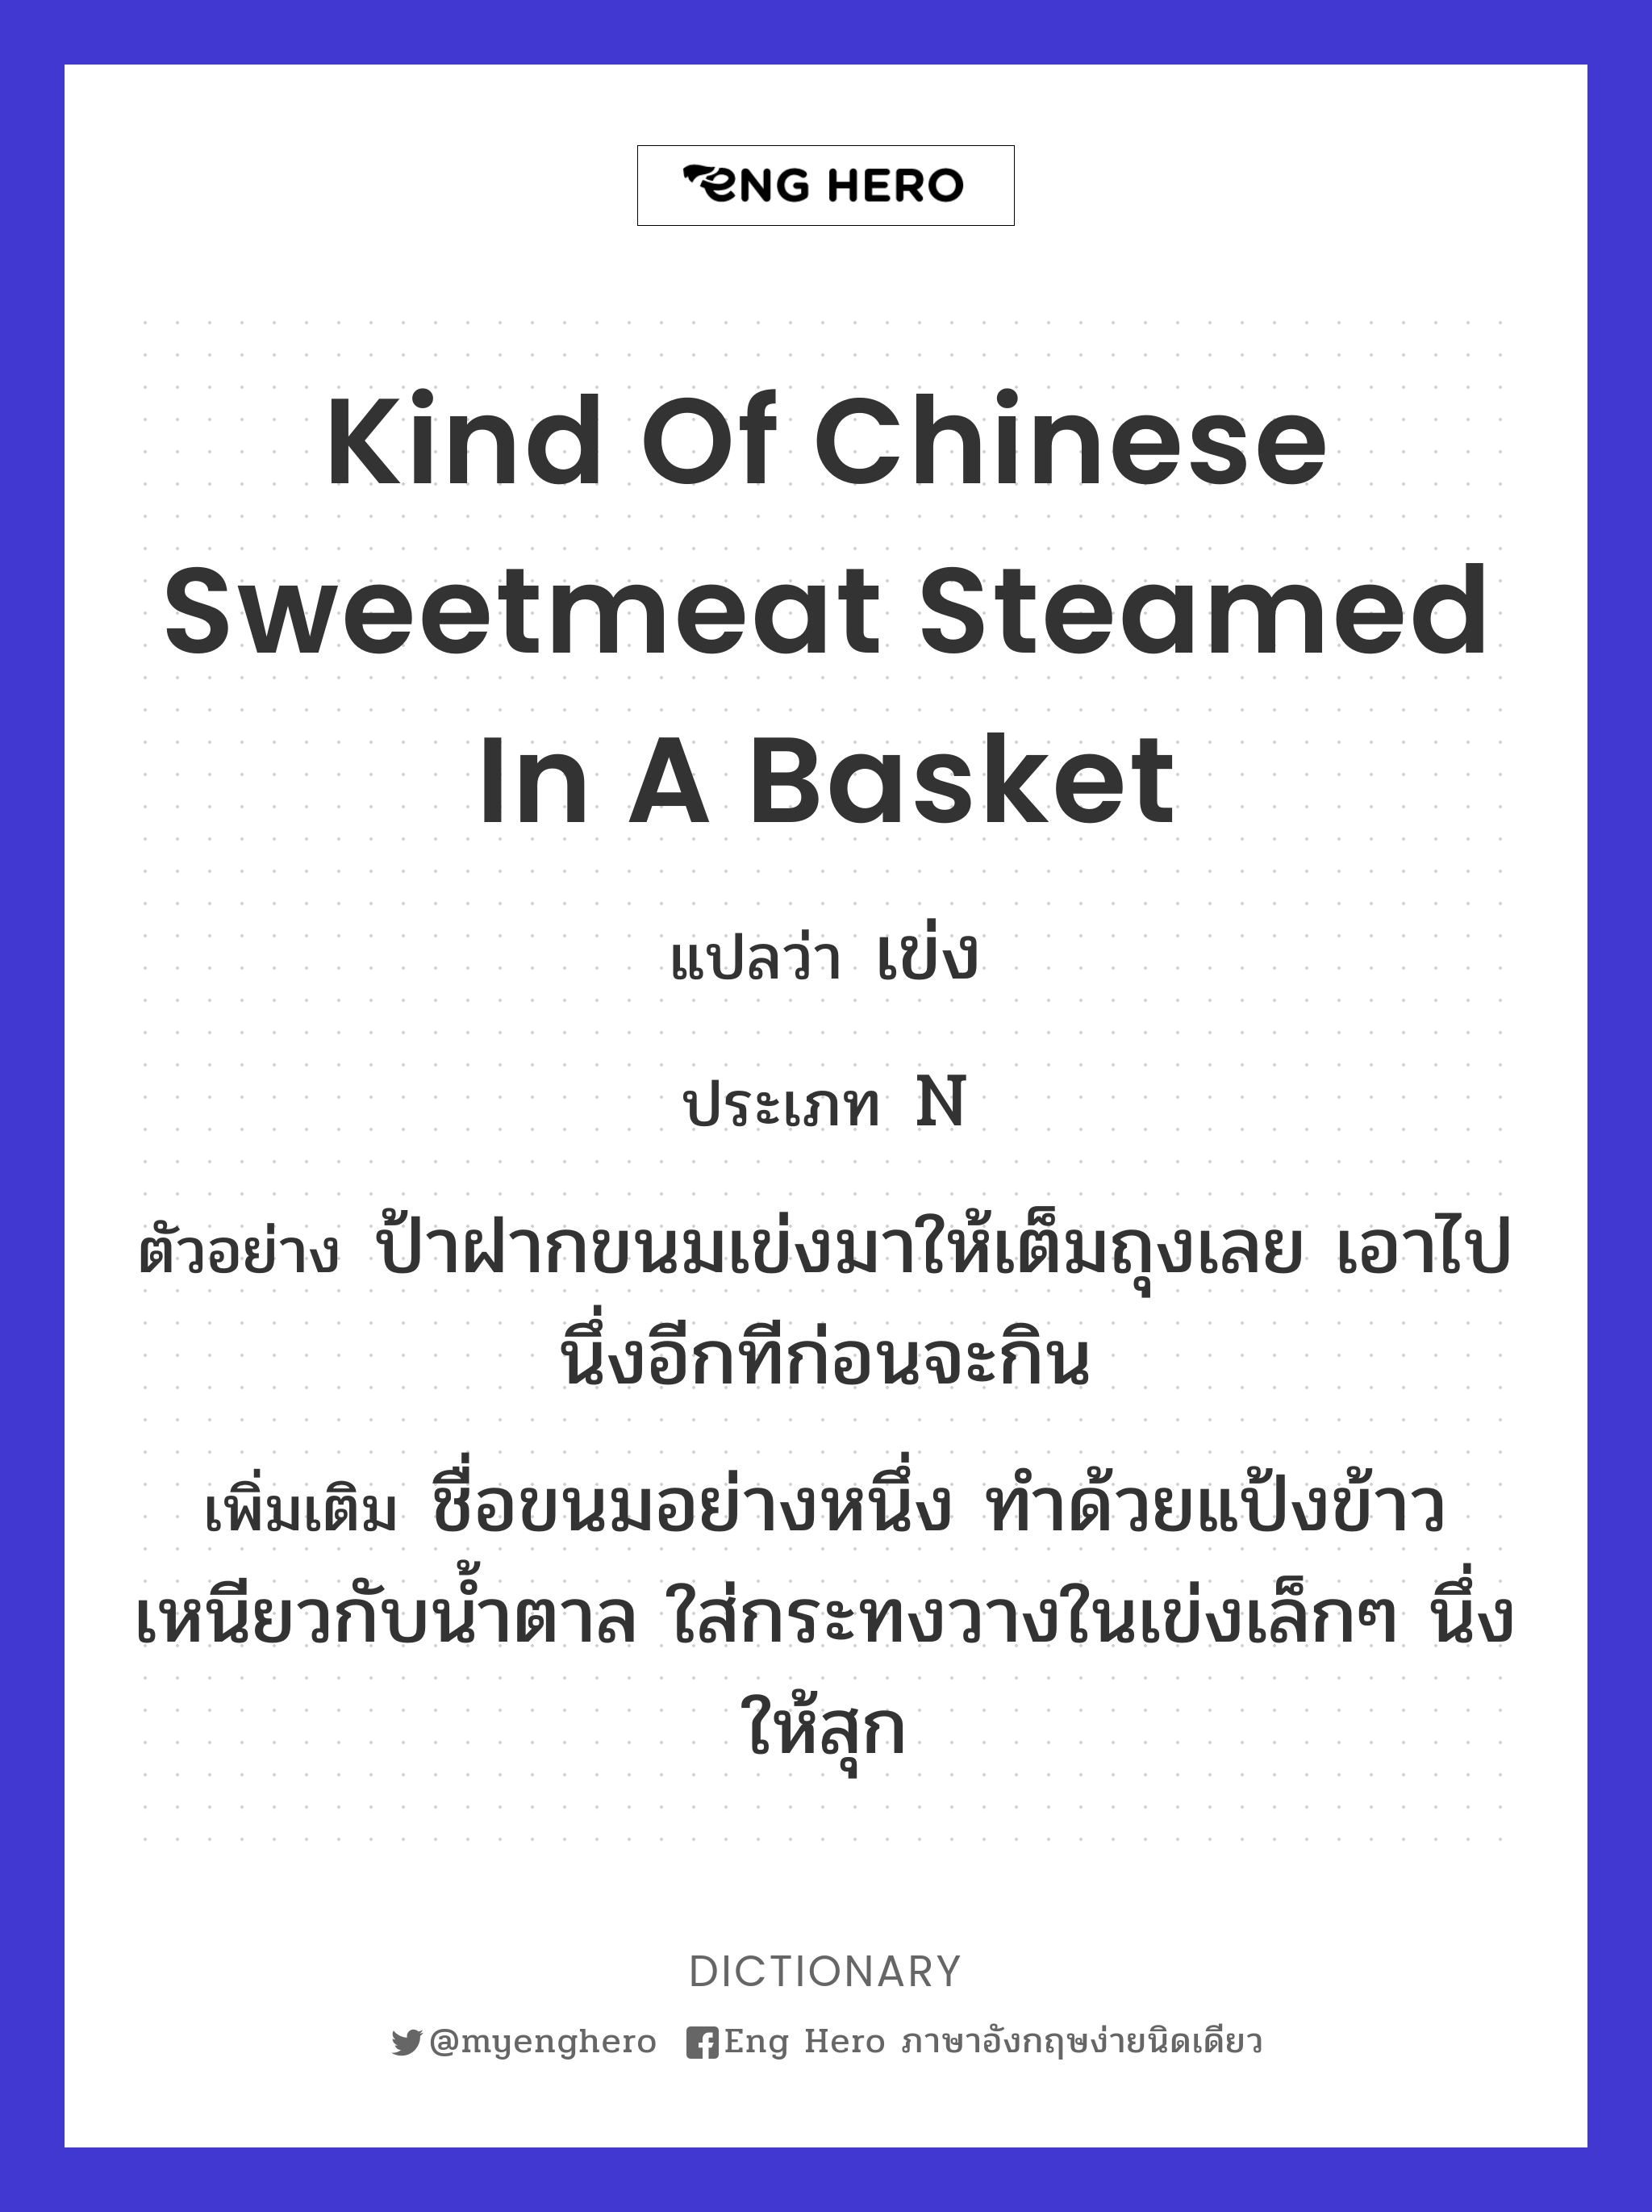 kind of Chinese sweetmeat steamed in a basket